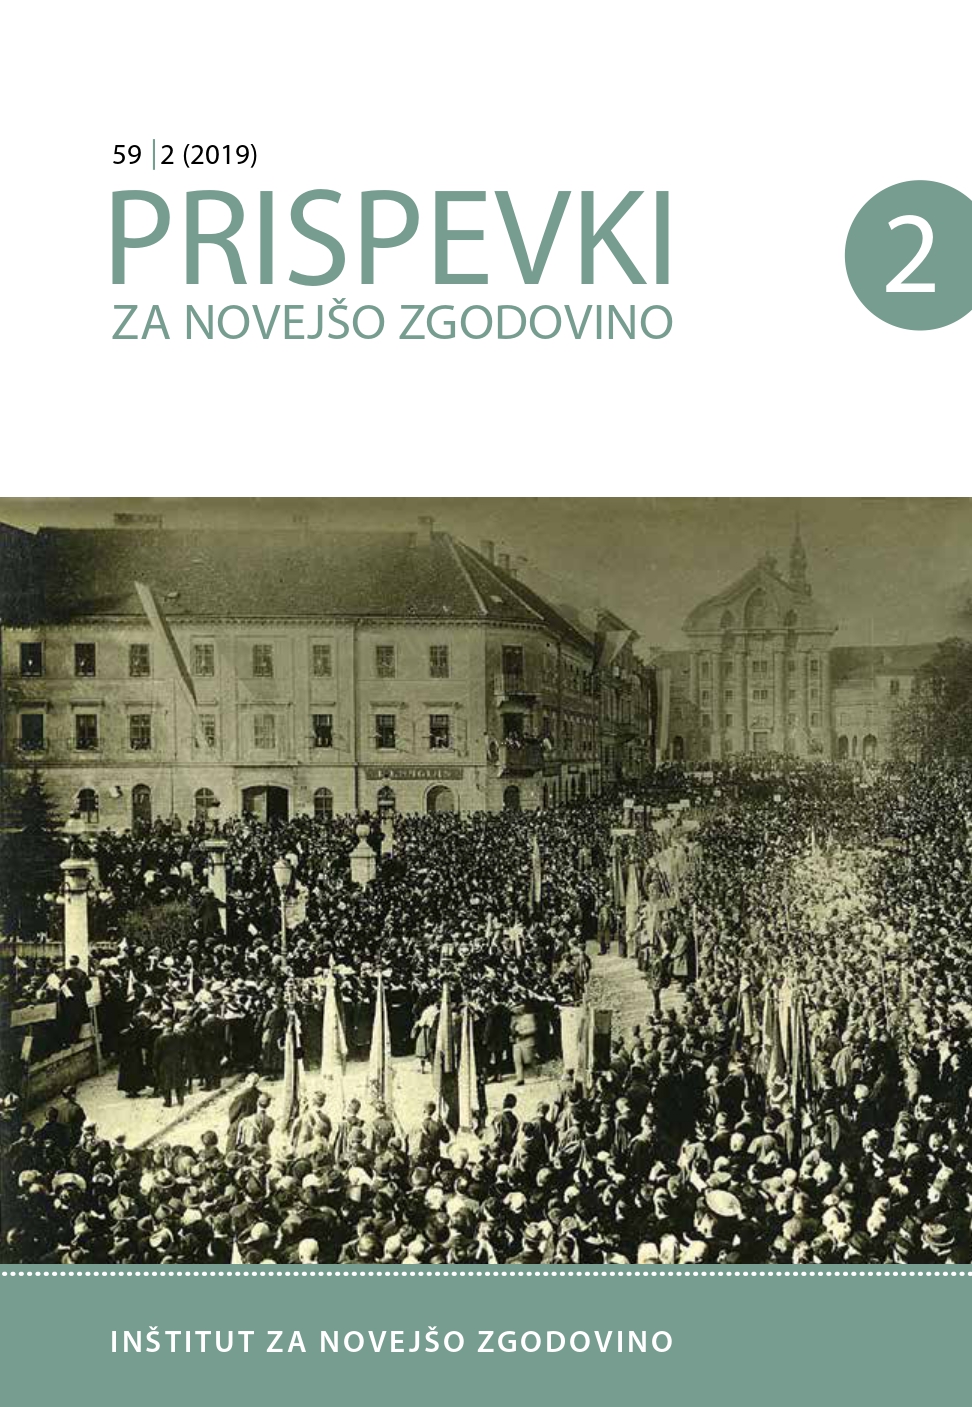 Ivan Žolger and the Last Revision Attempt of the Constitution of the Habsburg Monarchy: Possible Ties to Concieving the Constitutional Foundations for the New Polity?